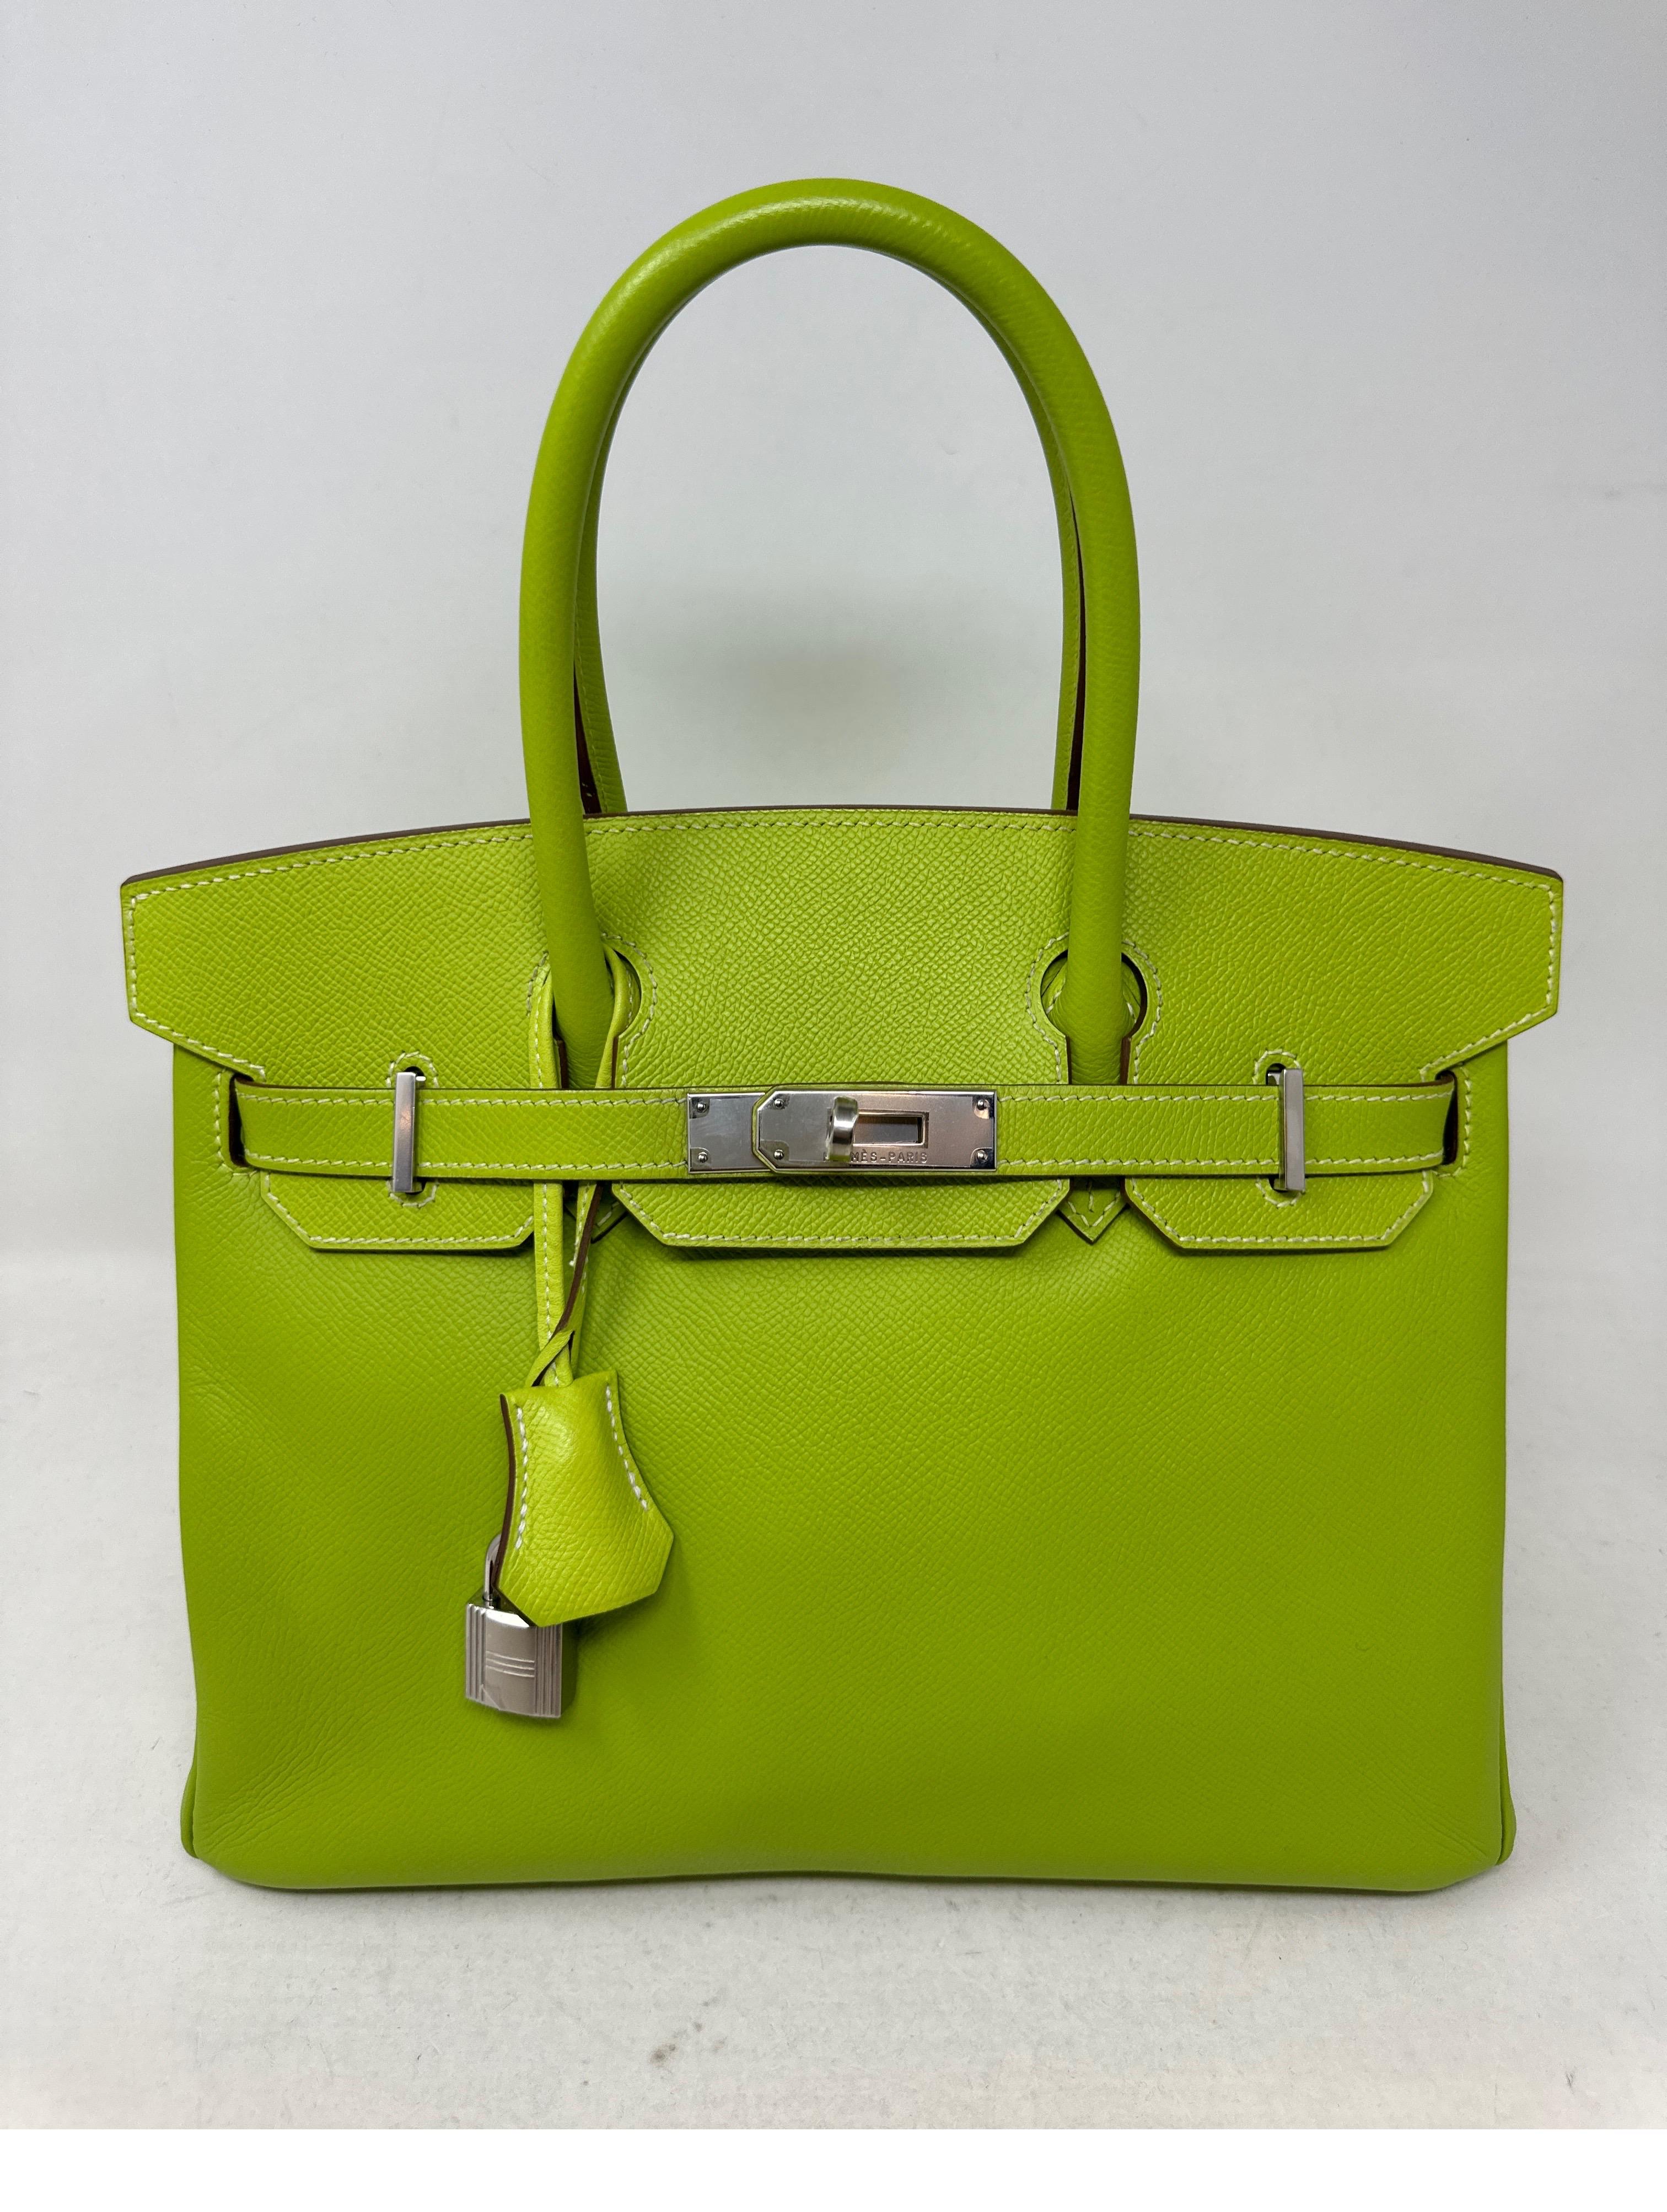 Hermes Lime Birkin 30 Bag. Bright almost neon green color bag. Candy color interior. Inside dark green olive interior. Palladium silver hardware. Excellent condition. Includes clochette, lock, keys, and dust bag. Guaranteed authentic. 